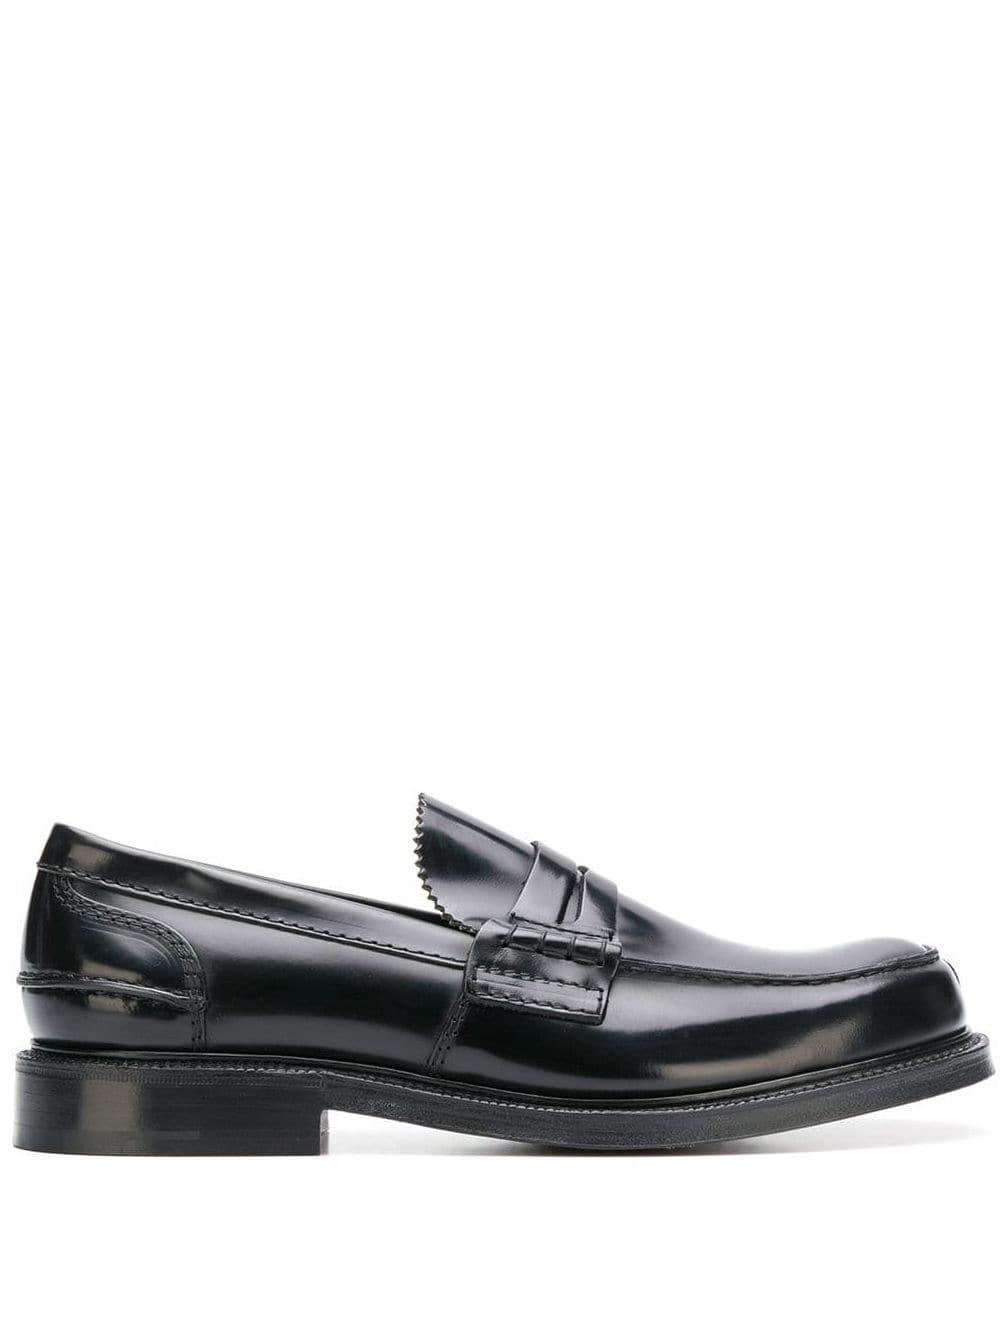 Church's Leather Willenhall Loafers in Black for Men - Lyst